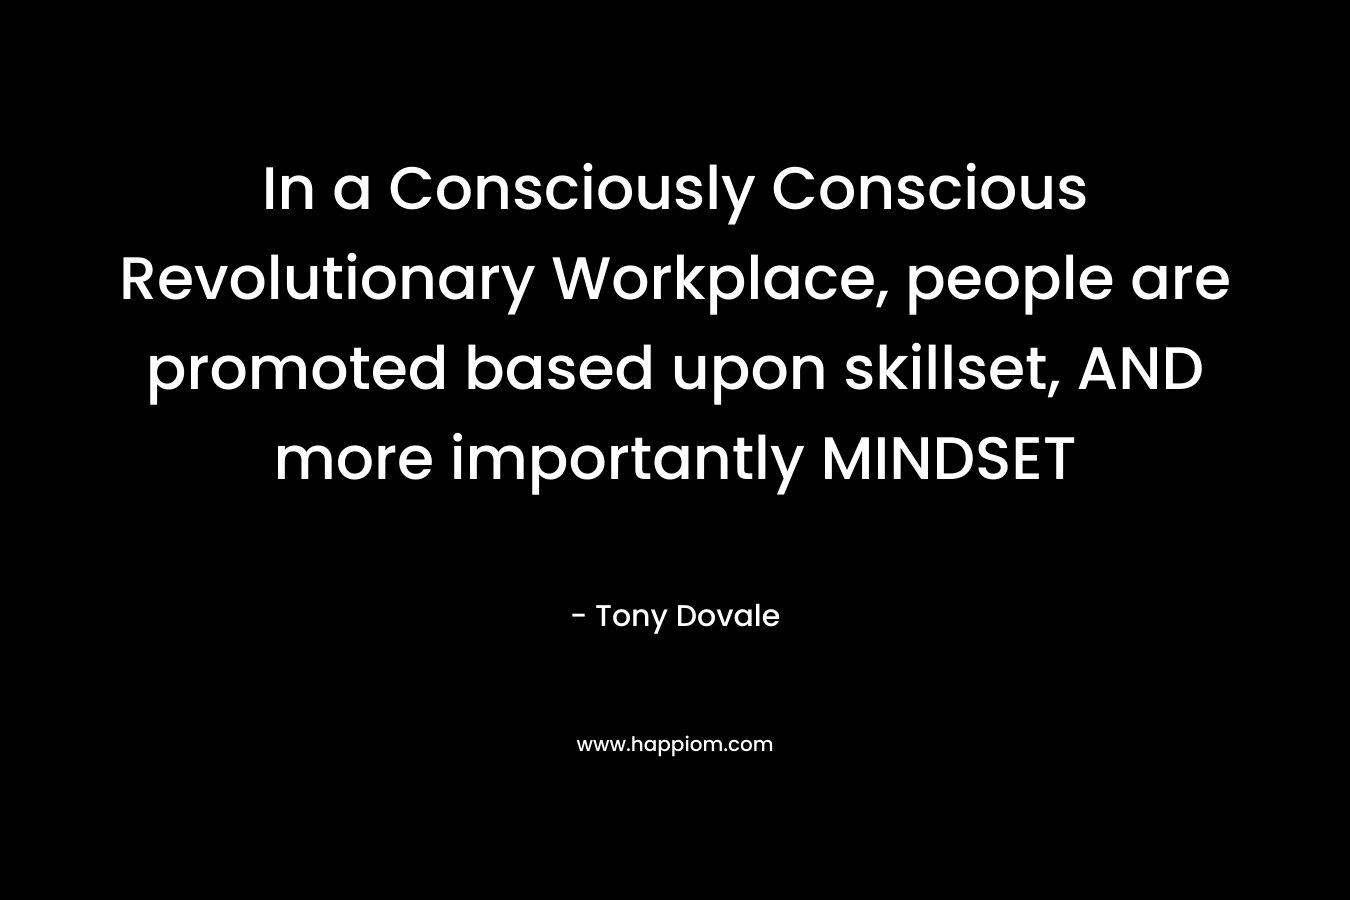 In a Consciously Conscious Revolutionary Workplace, people are promoted based upon skillset, AND more importantly MINDSET – Tony Dovale